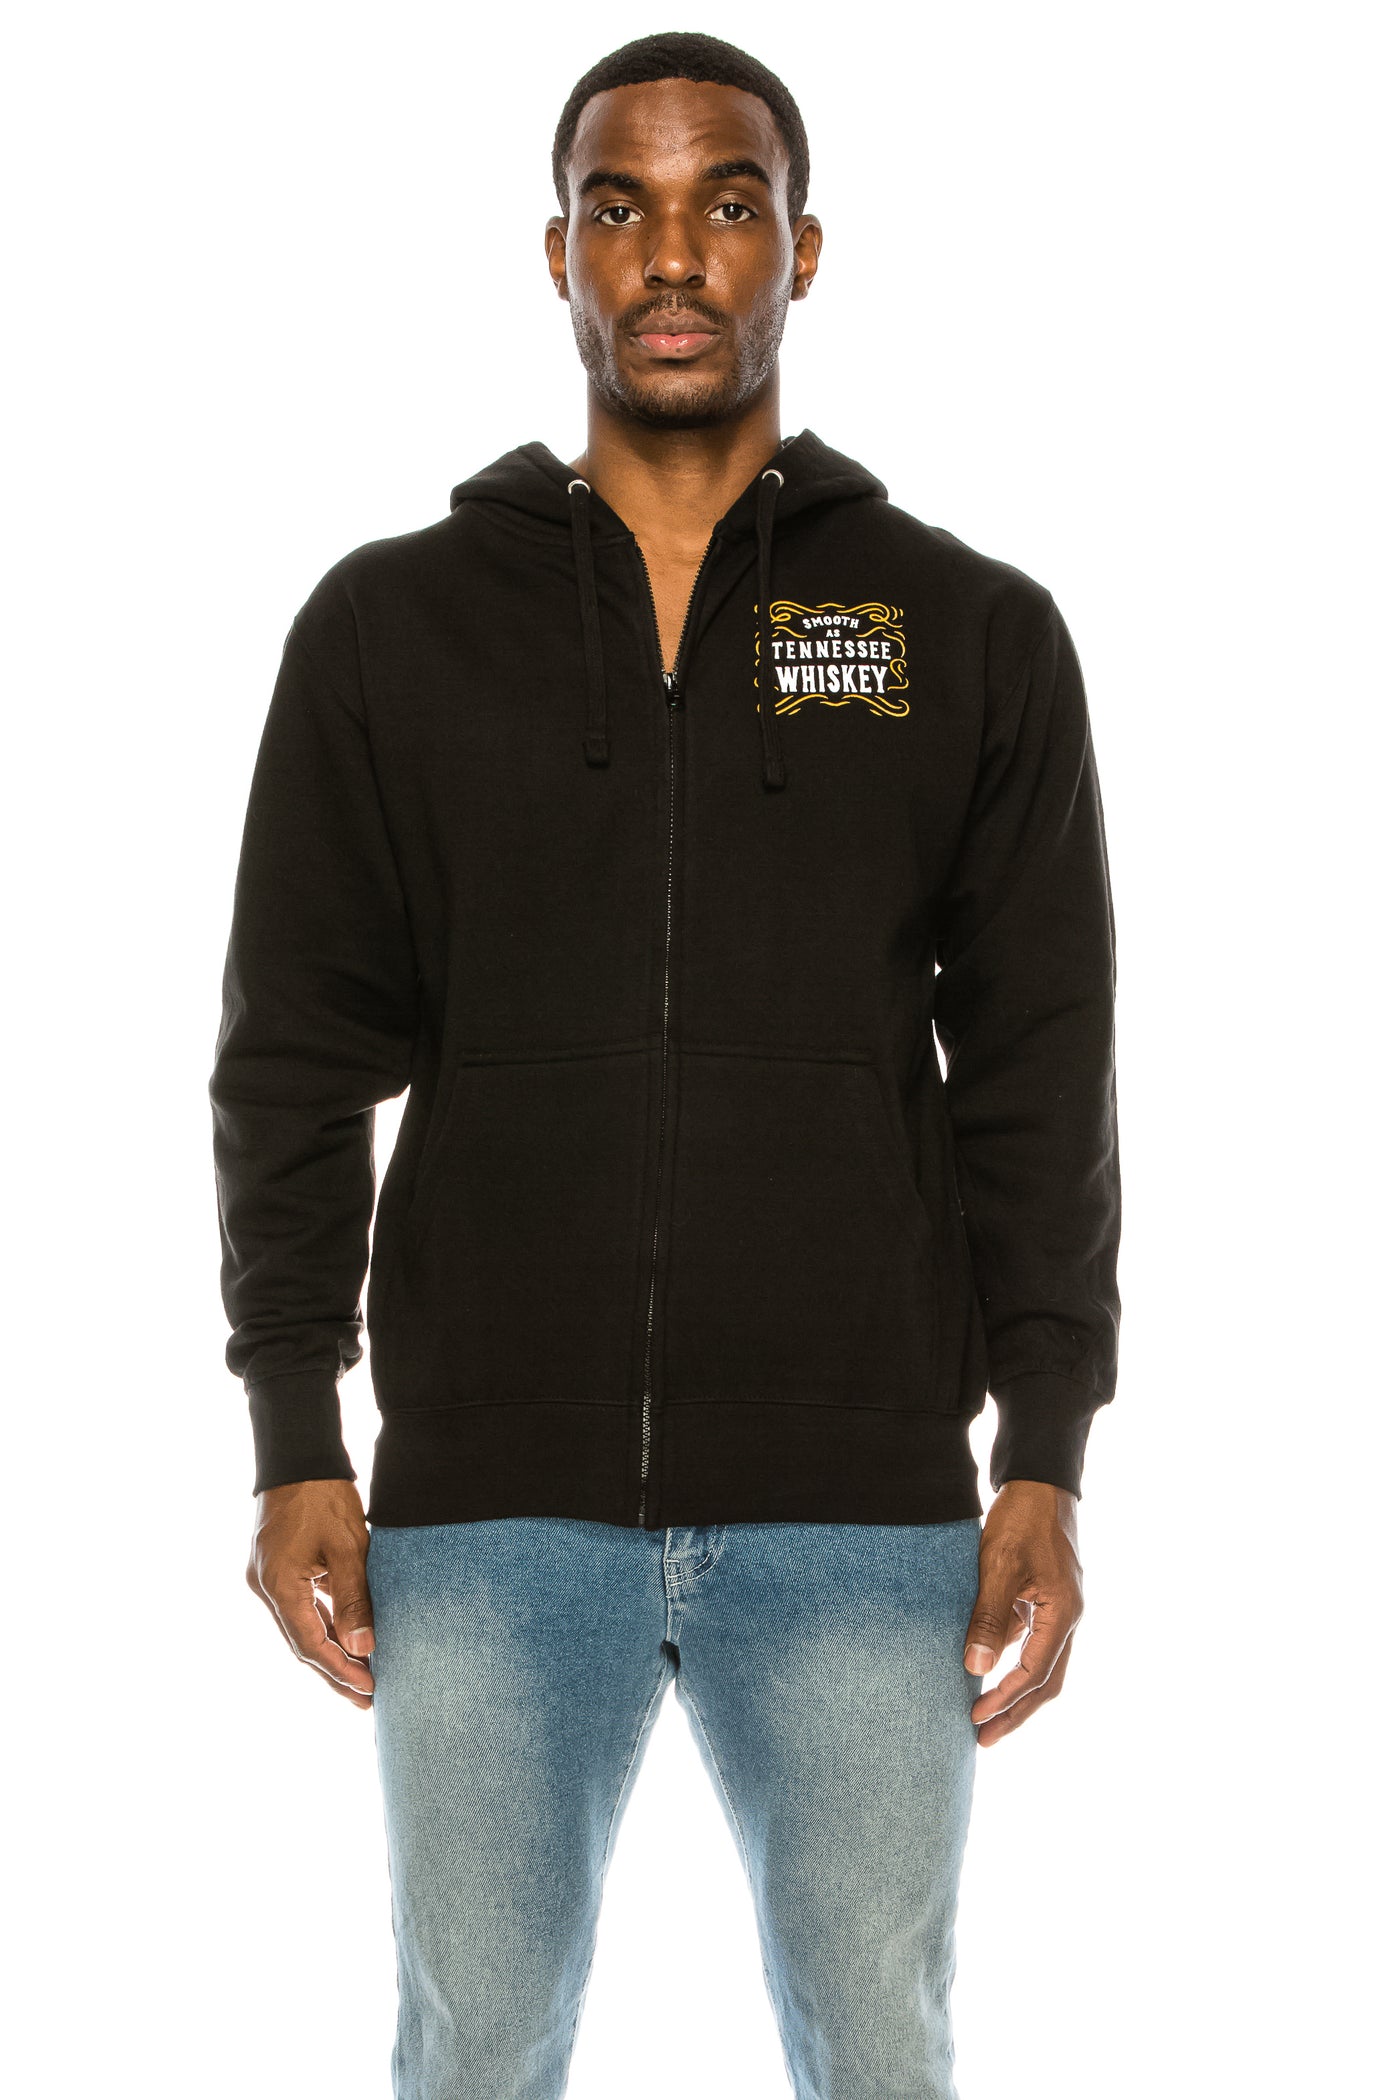 SMOOTH AS TENNESSEE WHISKEY ZIP HOODIE - Trailsclothing.com